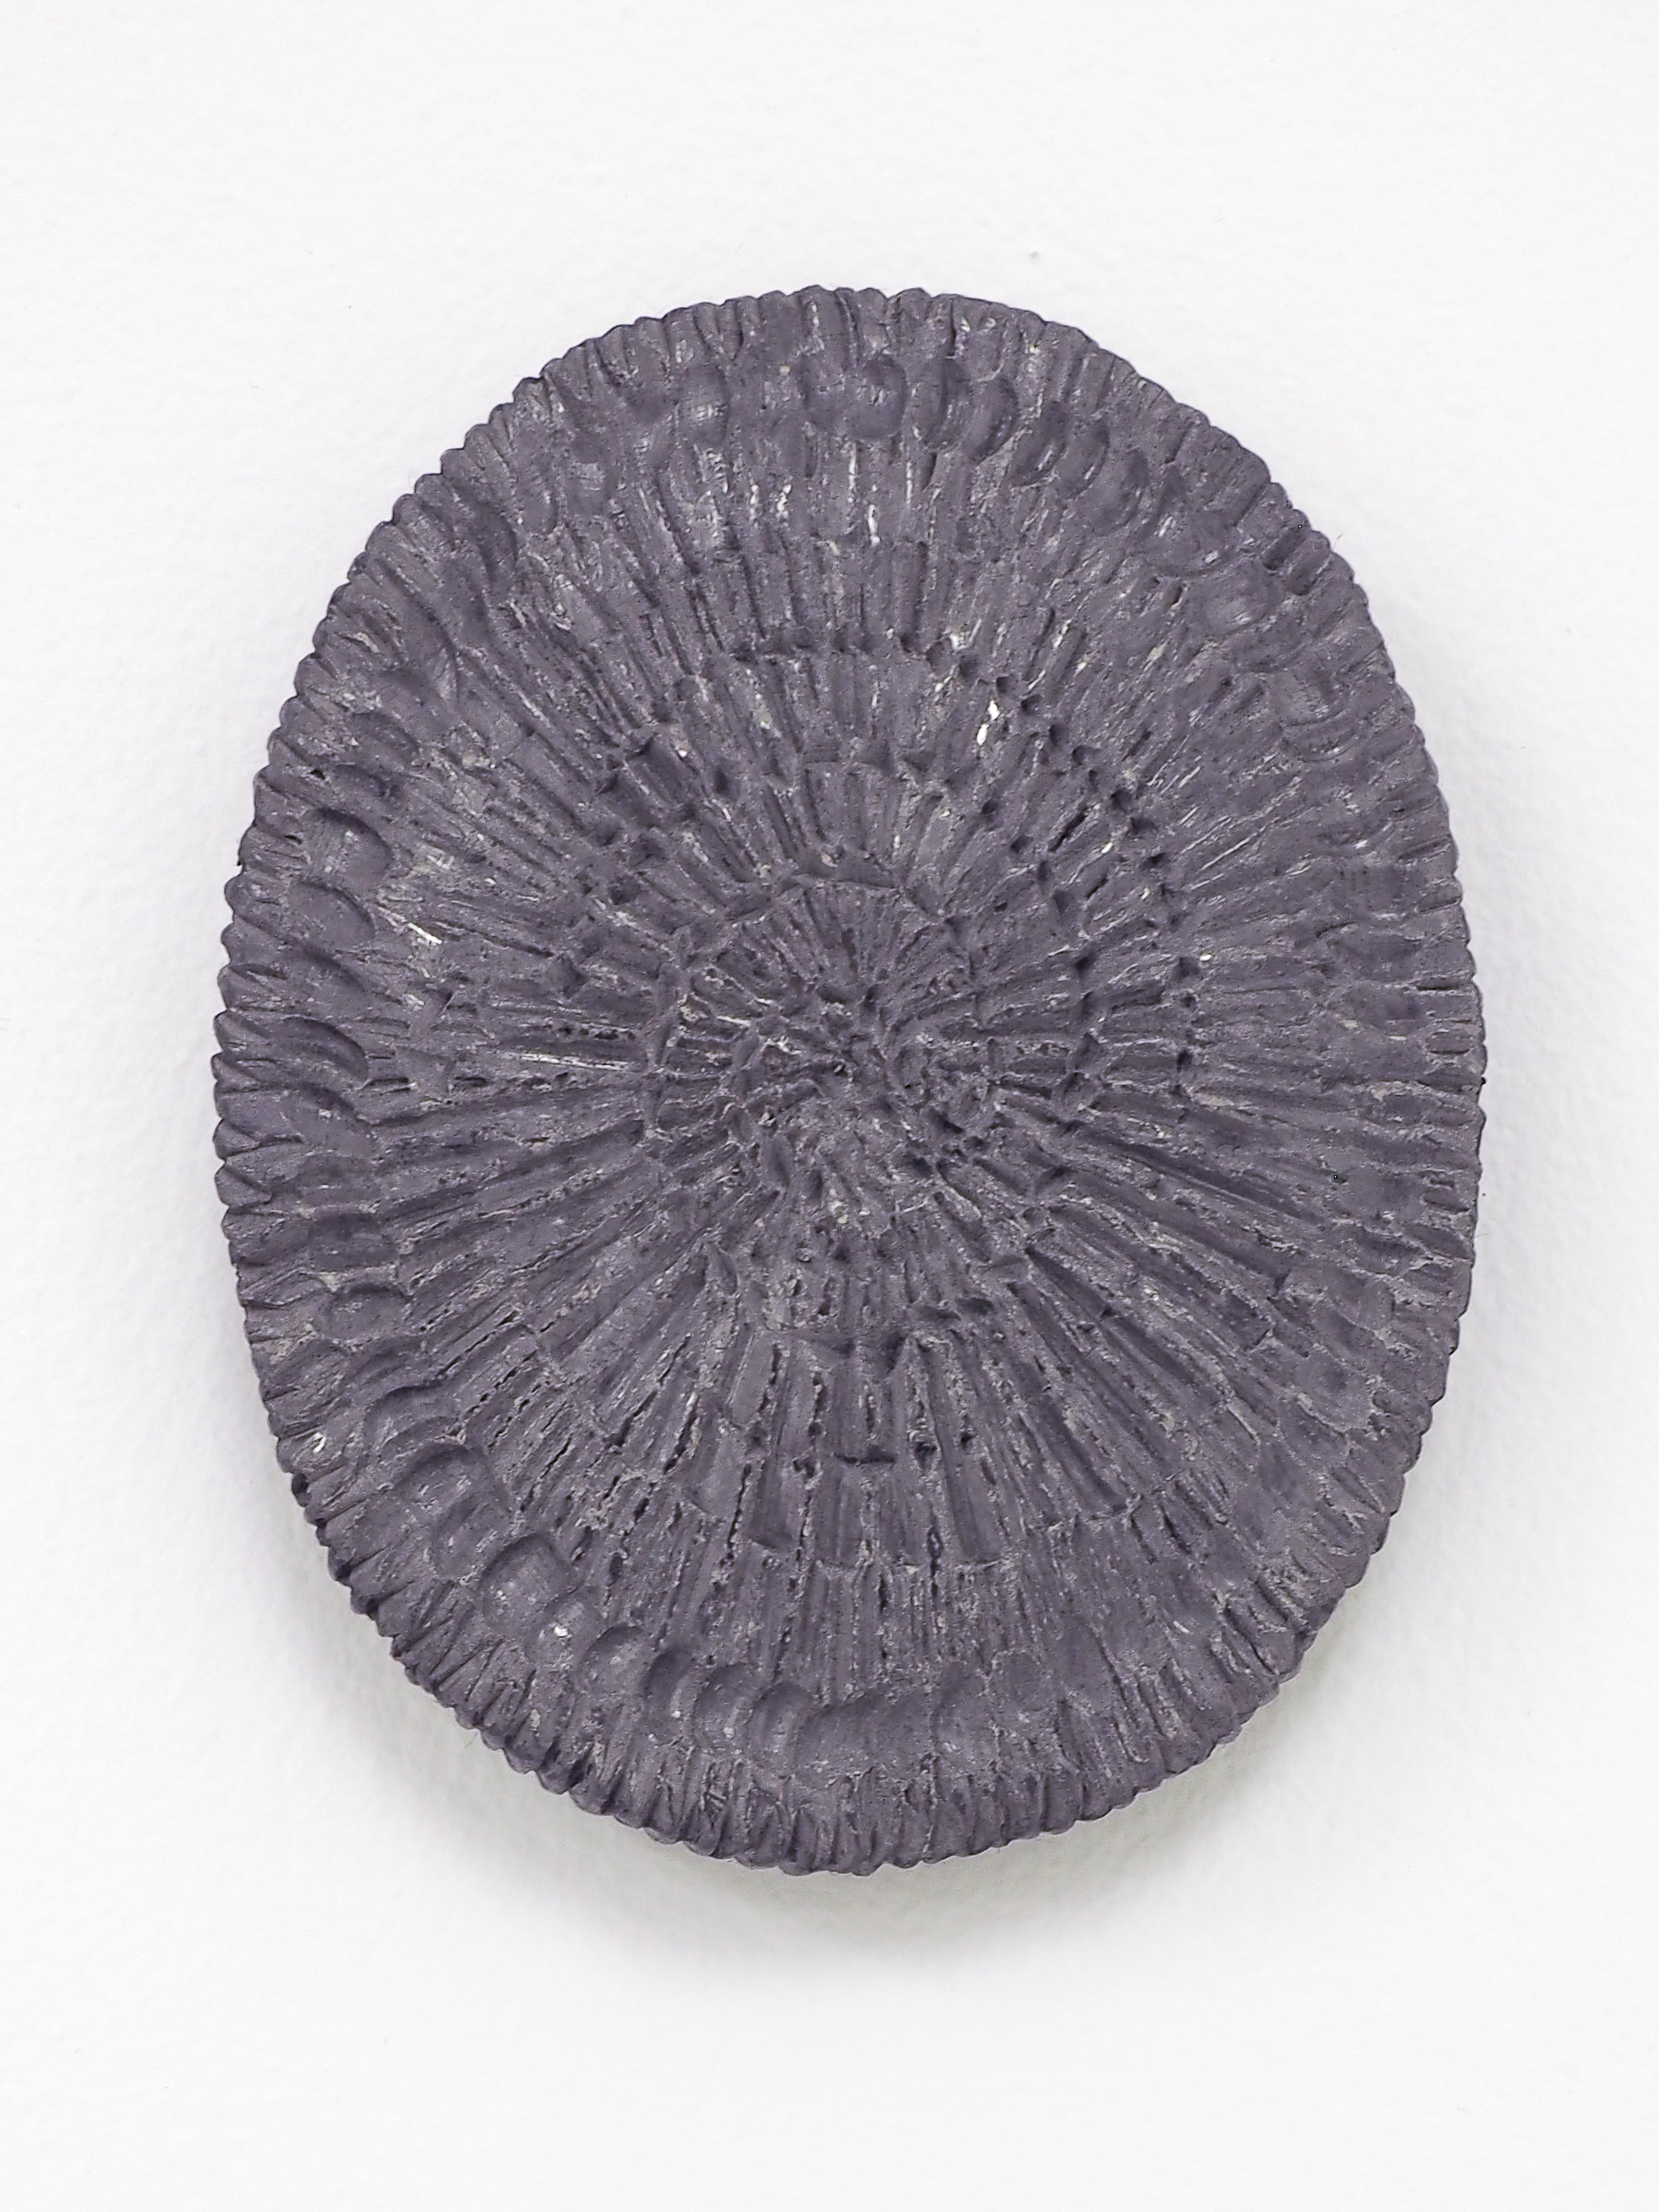  Thea Yabut,  Ossicle , 2019, clay, graphite, 4 x 5 inches 